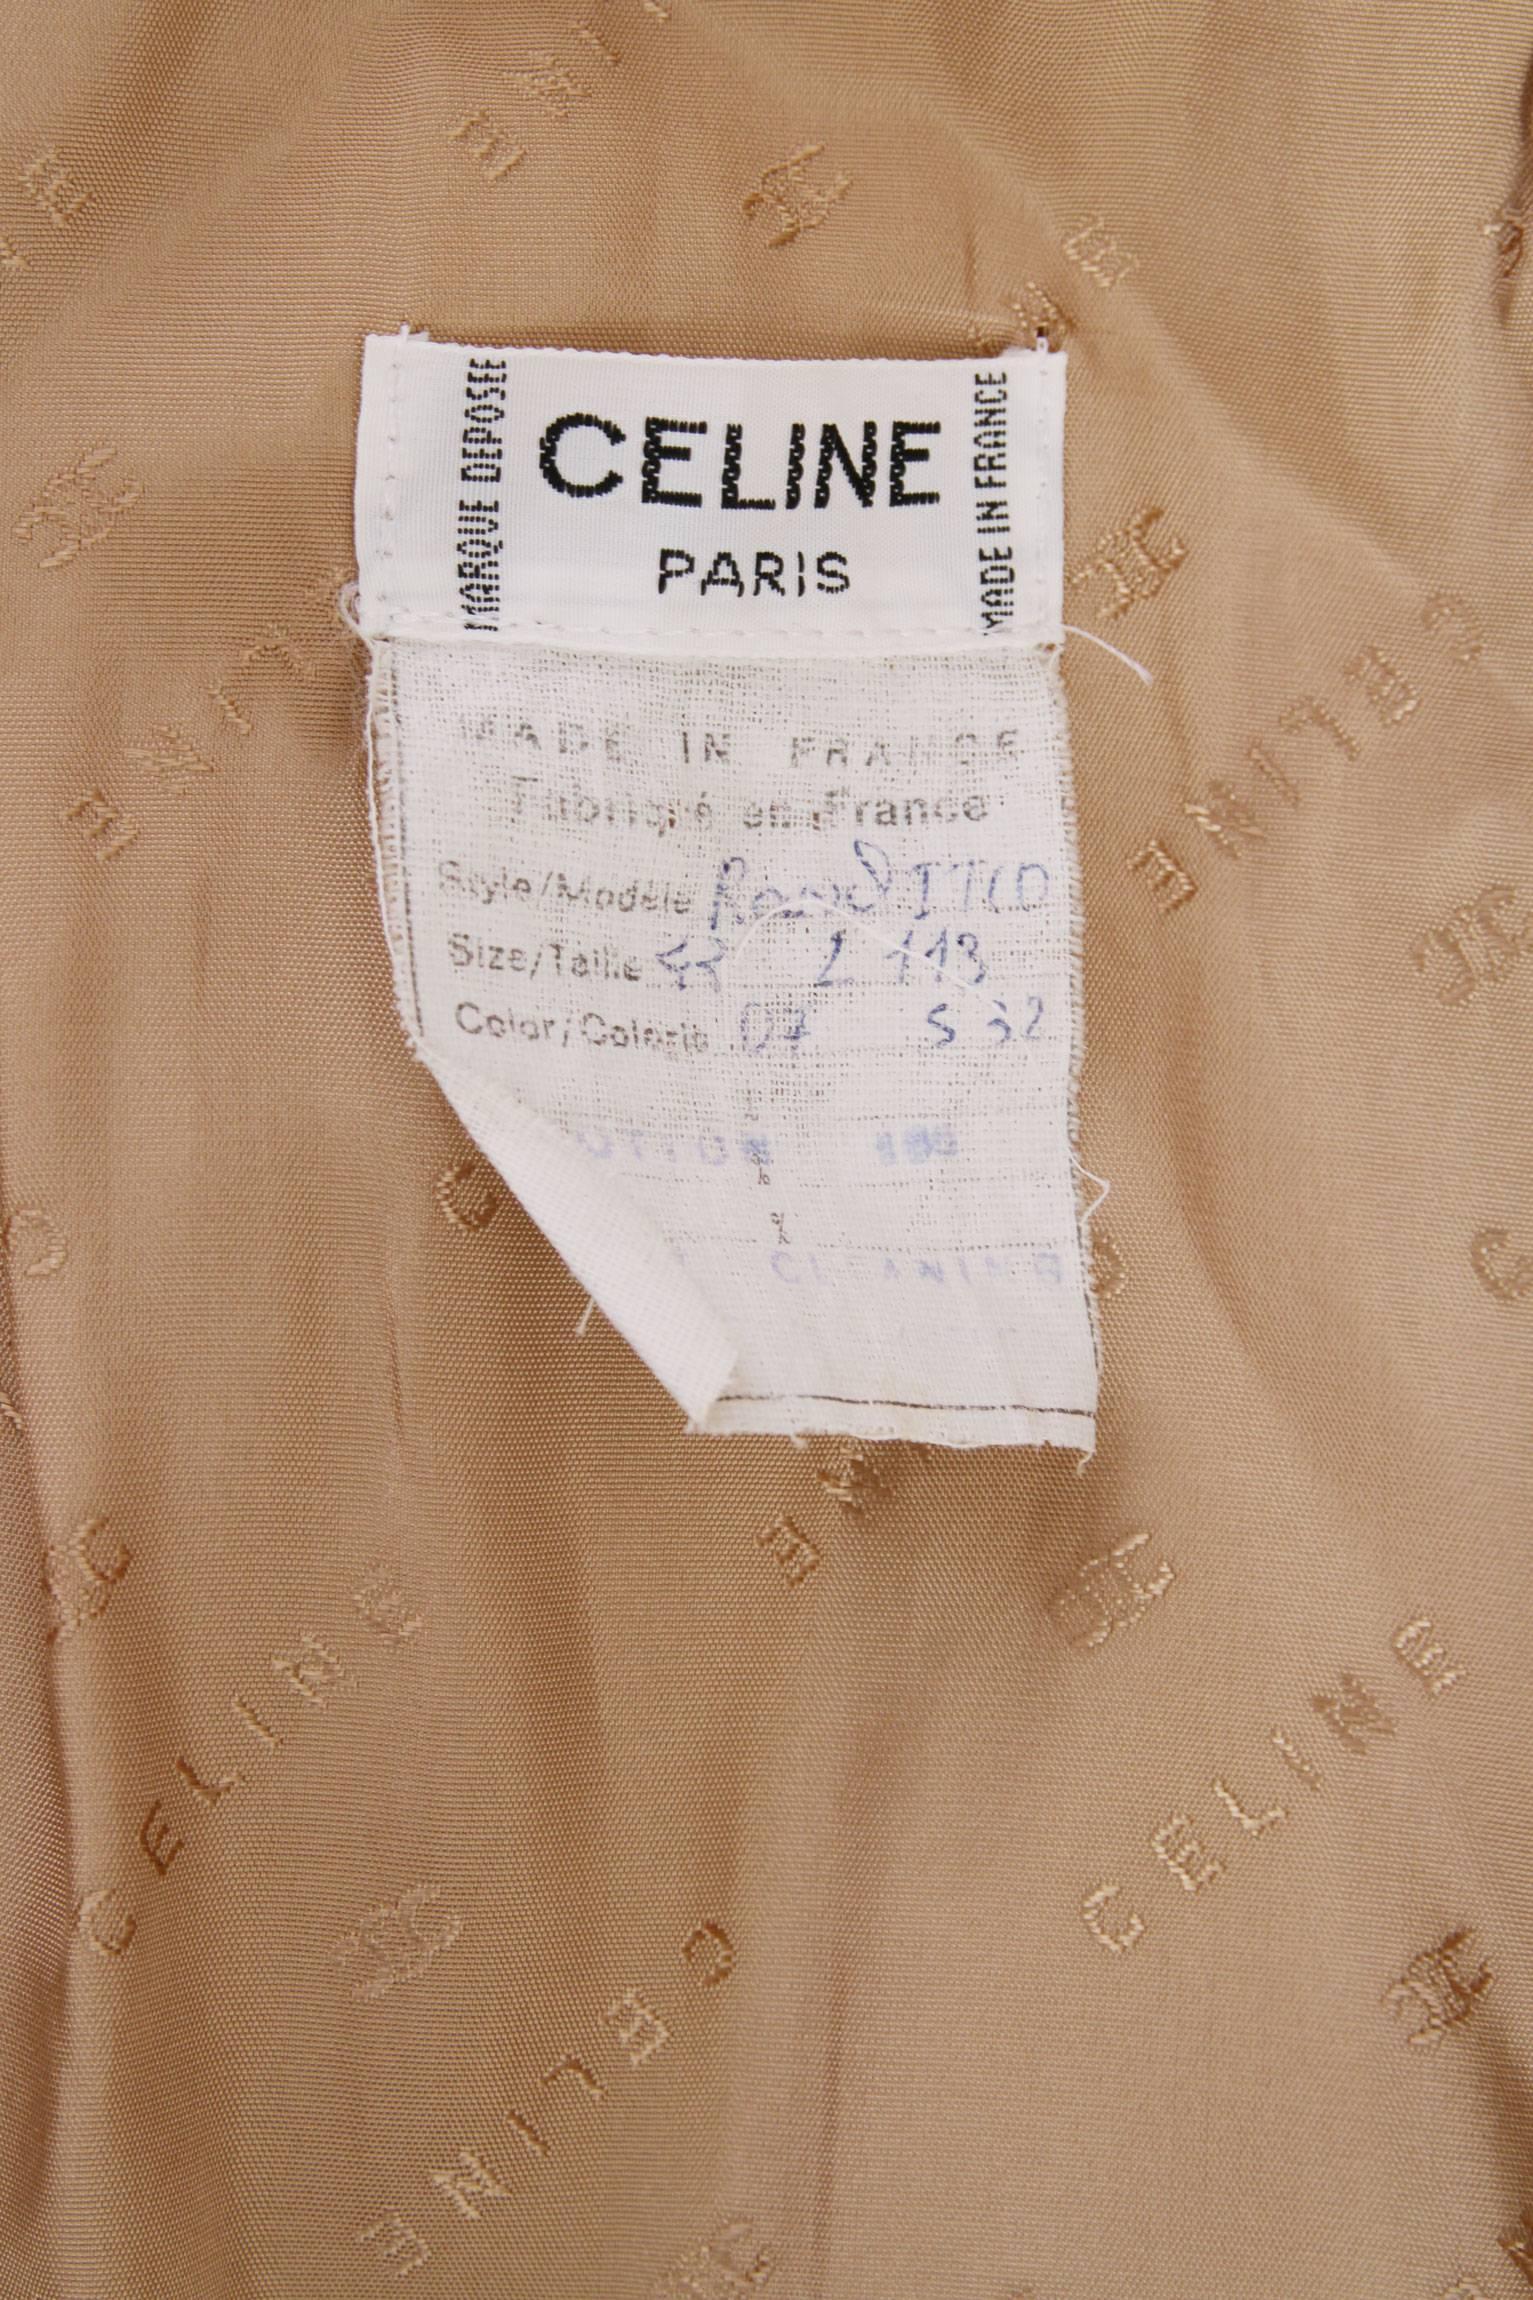 A gorgeous 1970s beige double-breasted Céline cotton trench coat with matching round gold buttons with the Céline logo imprint. A delicate white stitching detail around the hemline, side pockets and waits-belt adds a a final elegant touch to the